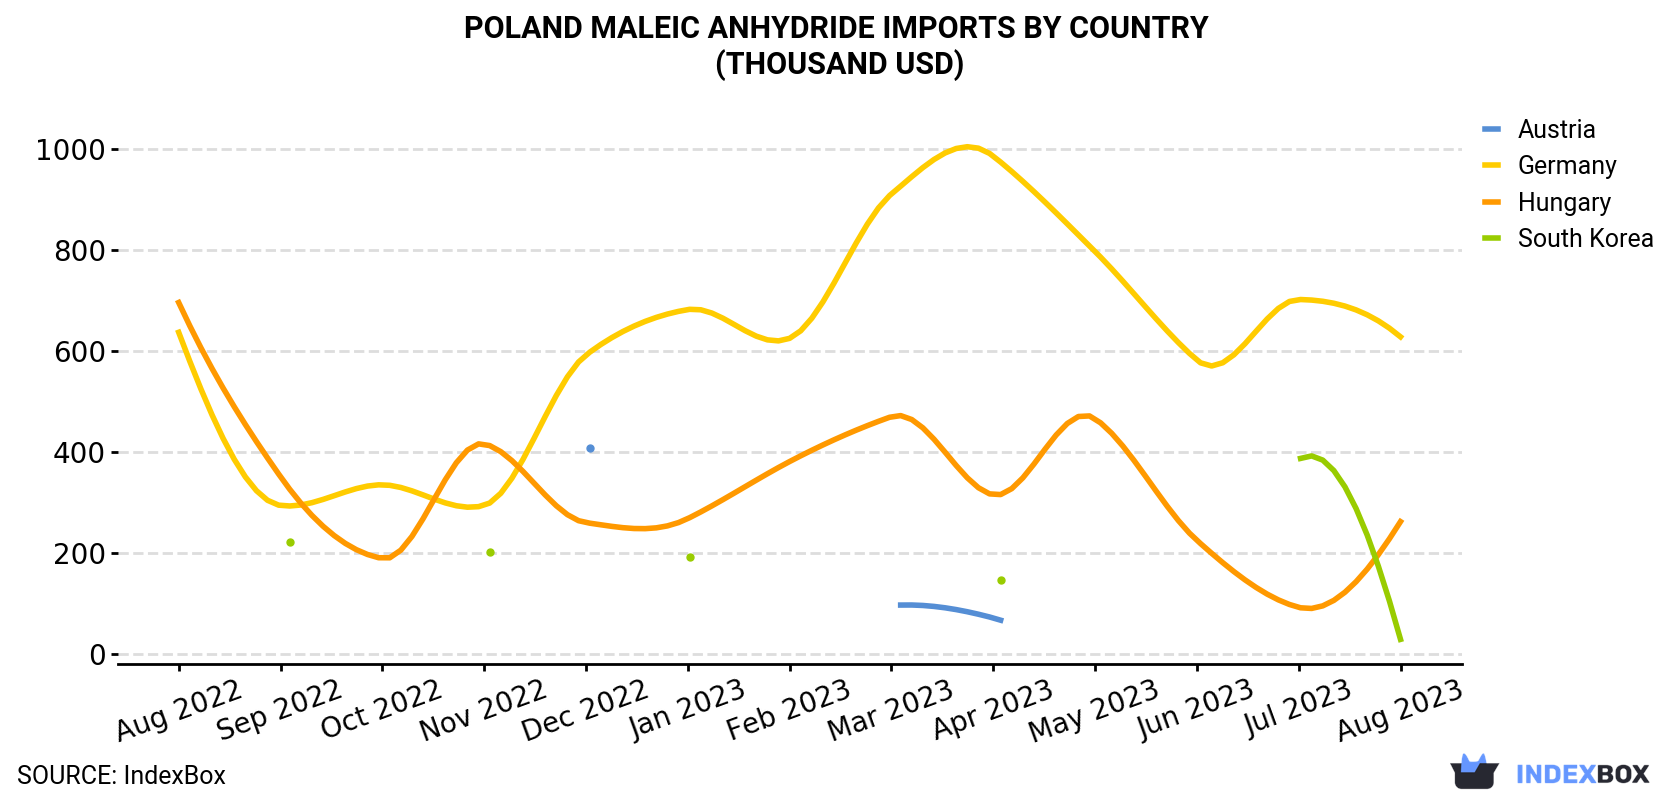 Poland Maleic Anhydride Imports By Country (Thousand USD)